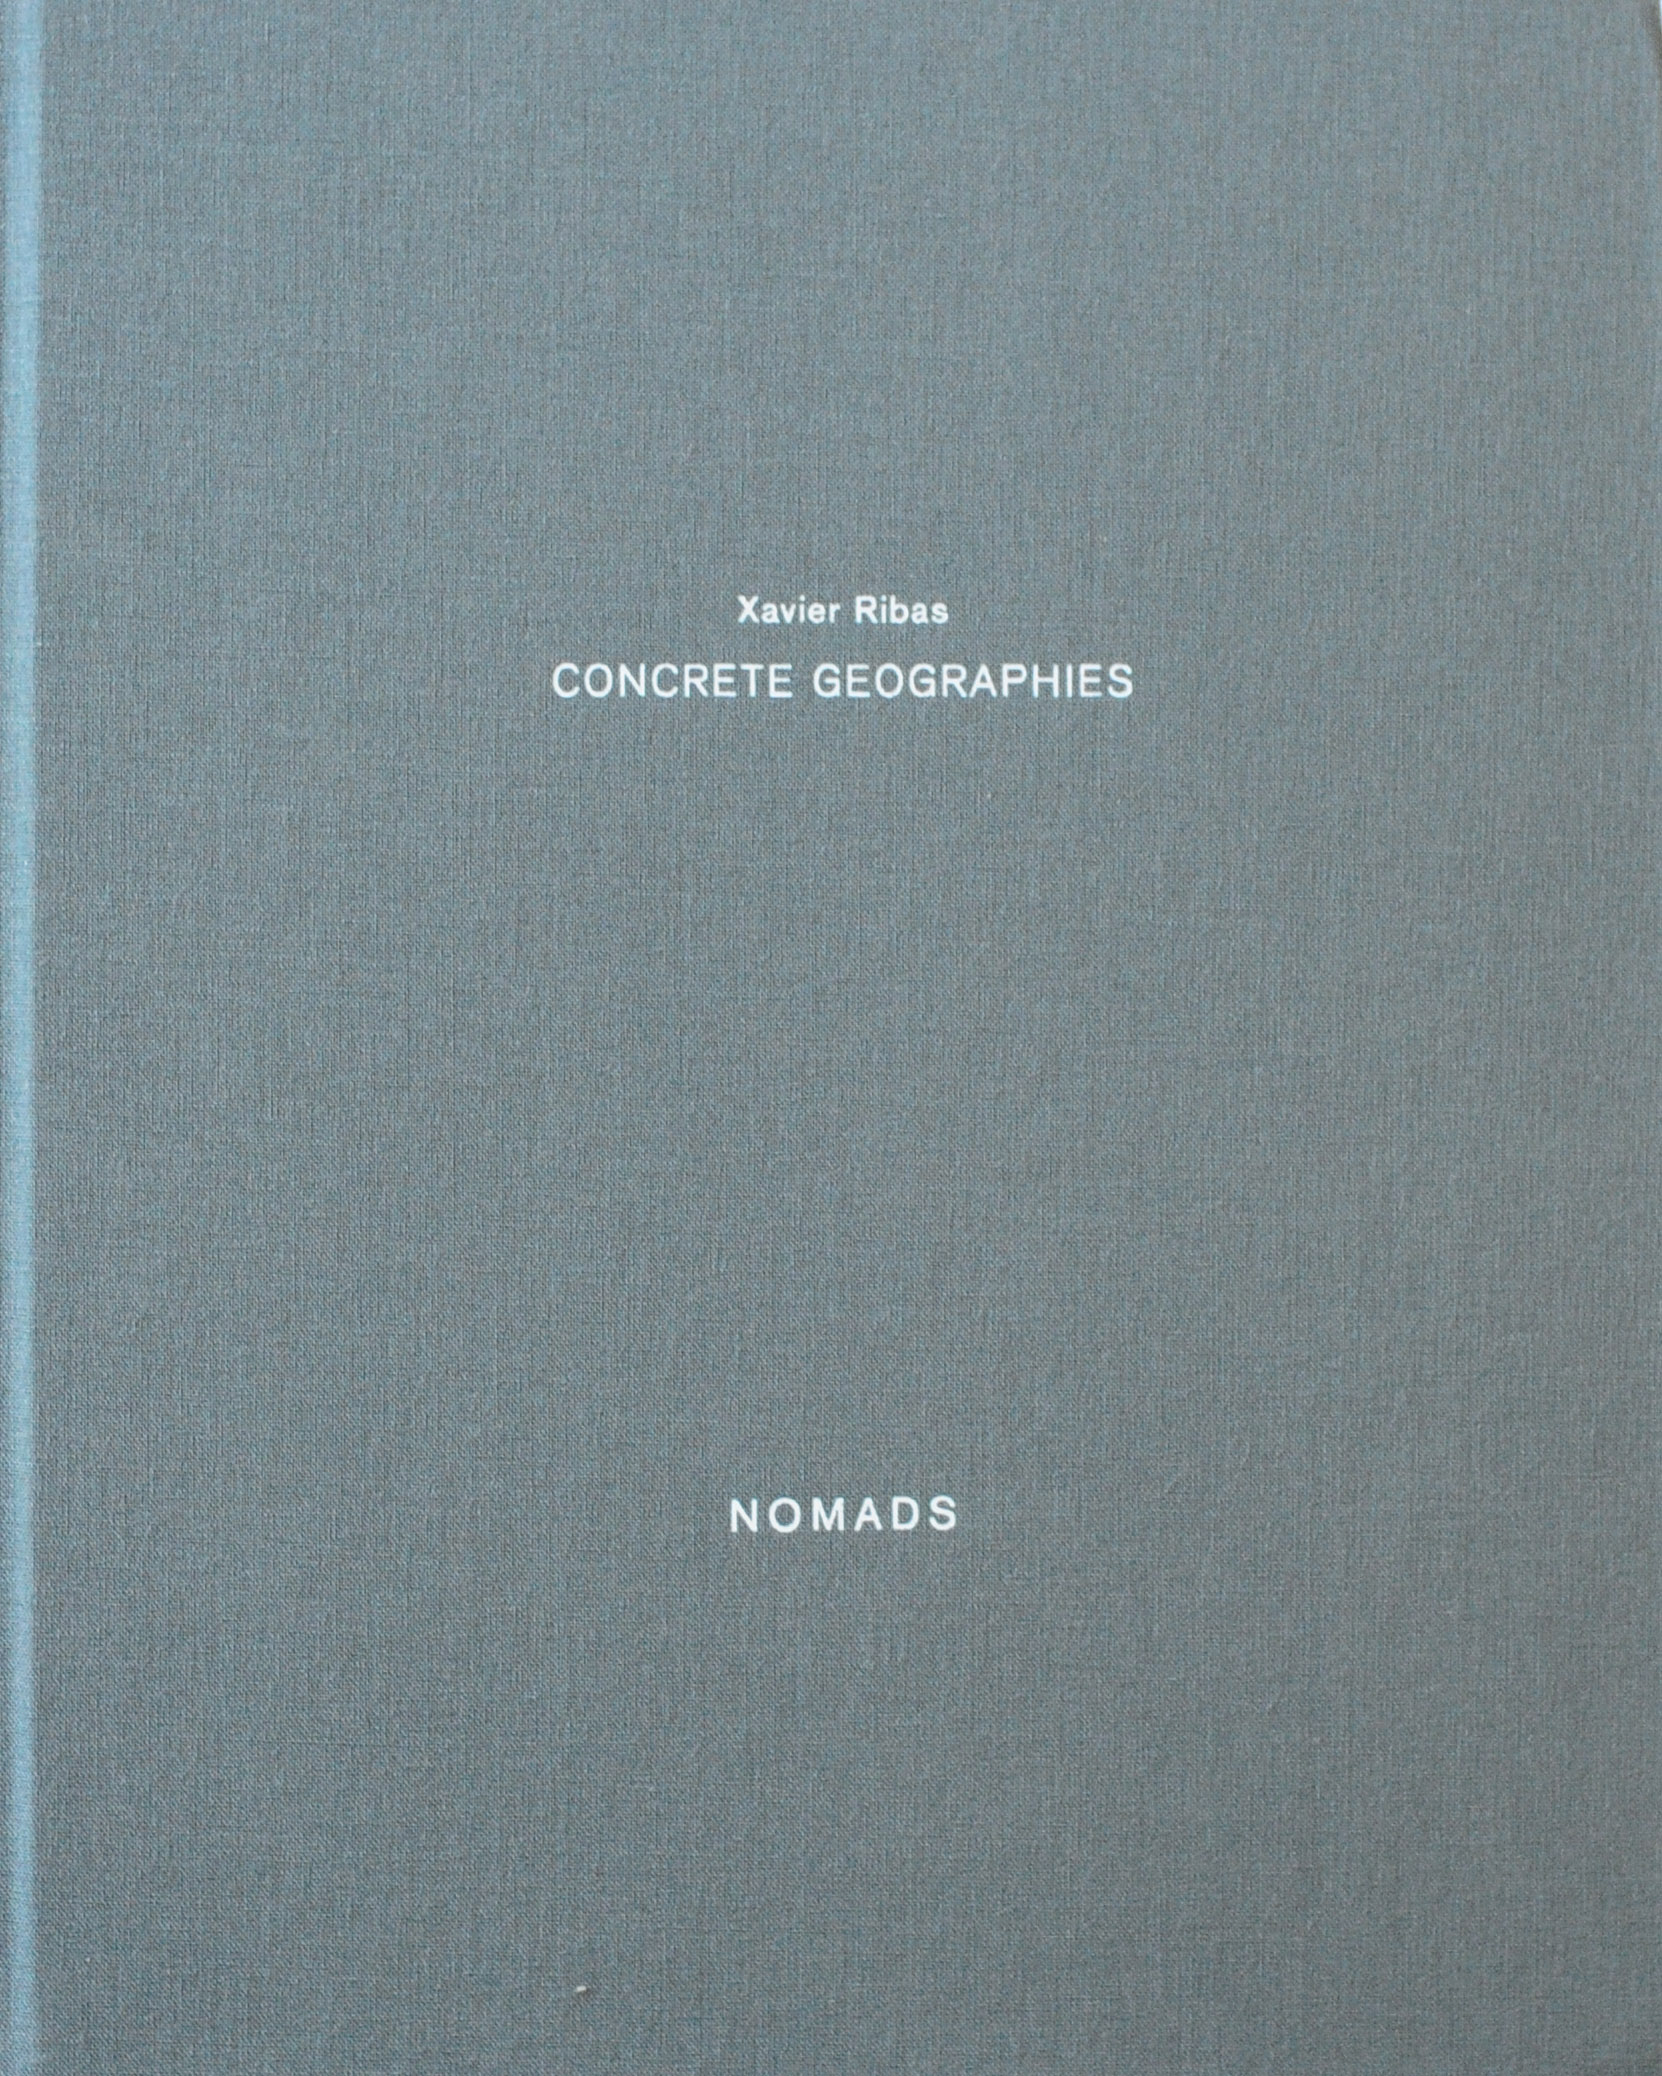 Concrete Geographies (Nomads), Xavier Ribas